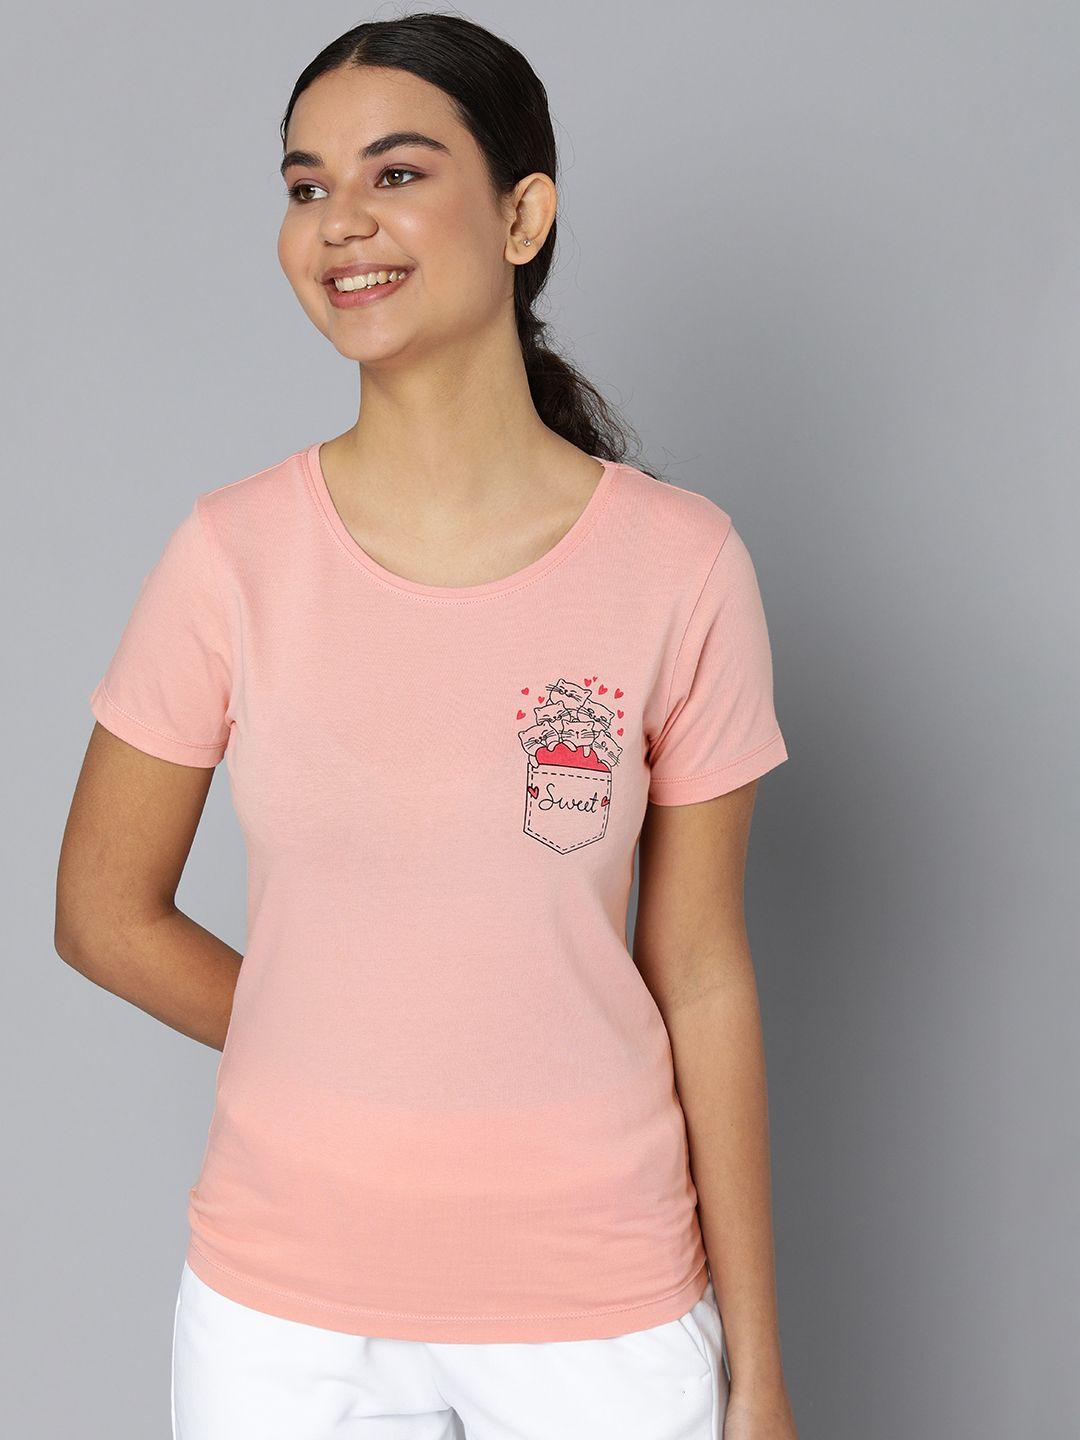 here&now women pink printed t-shirt